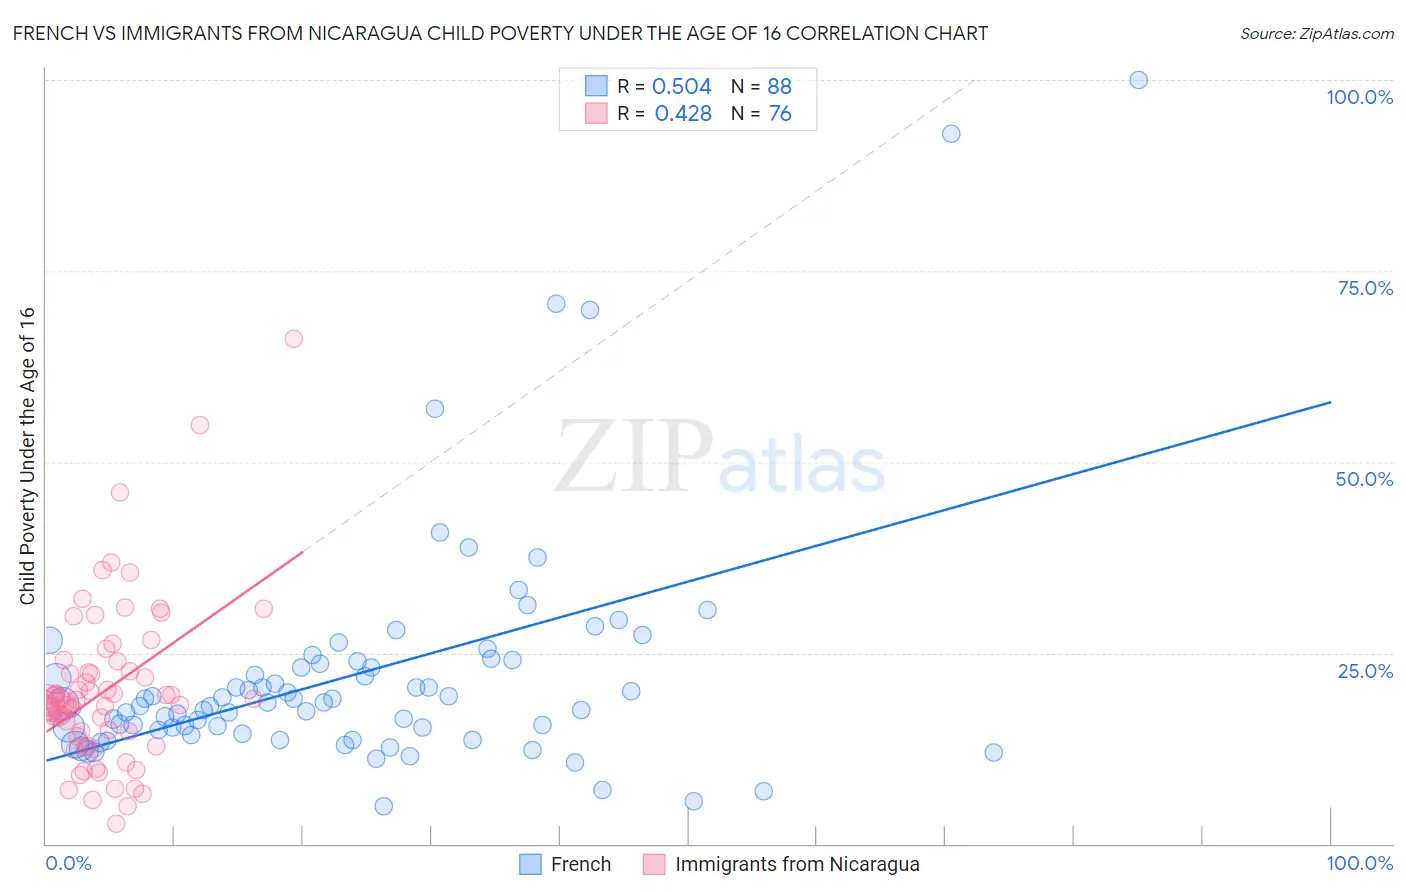 French vs Immigrants from Nicaragua Child Poverty Under the Age of 16